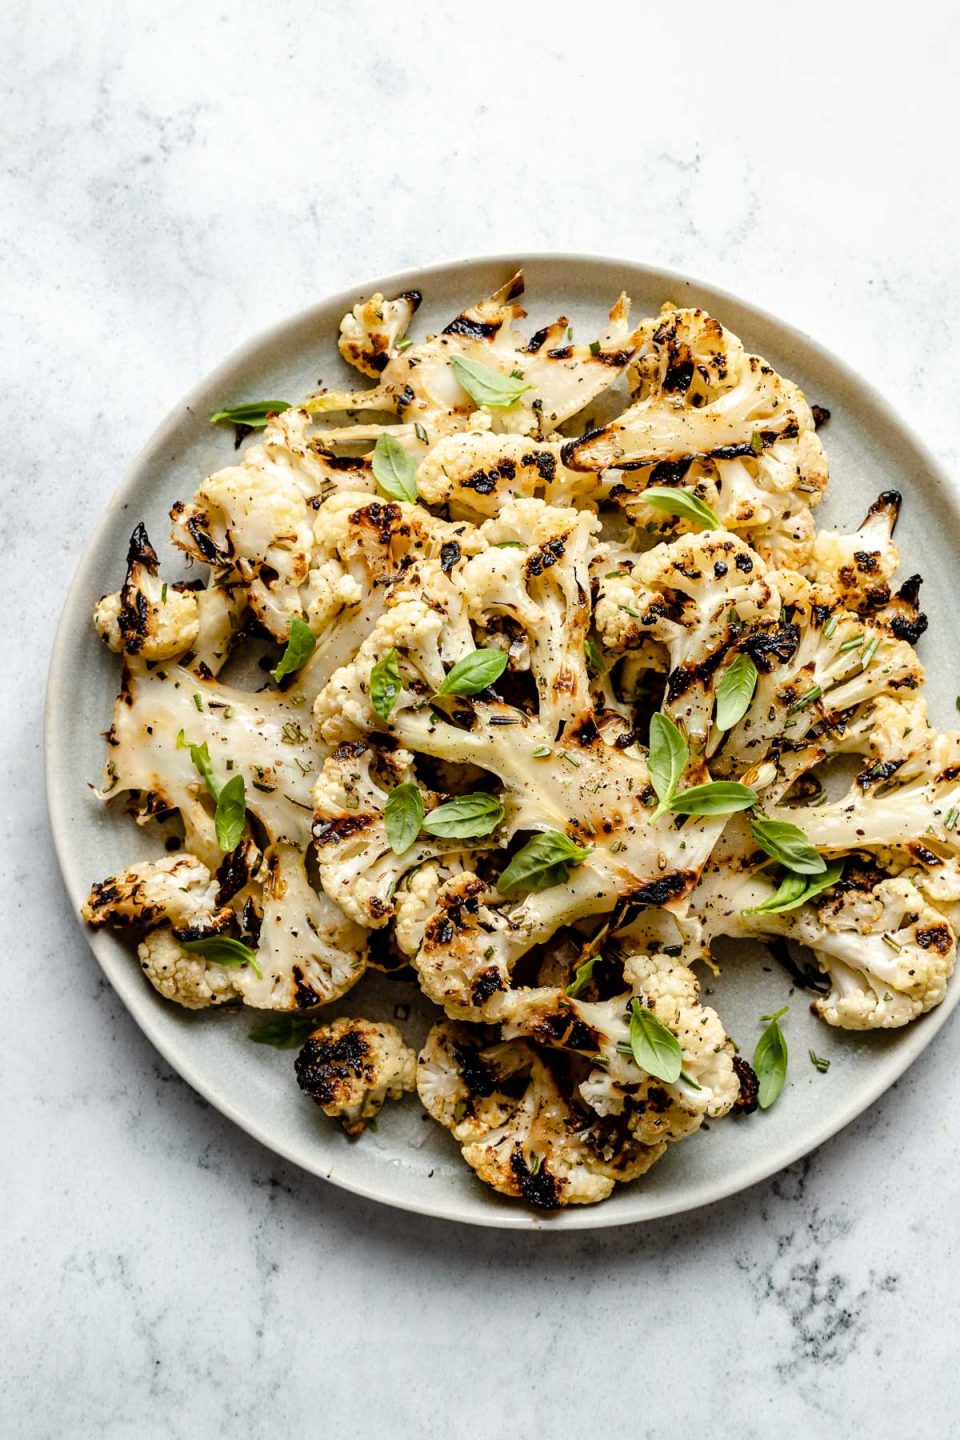 Grilled cauliflower with char marks arranged on a white ceramic plate. The cauliflower is garnished with ground black pepper, kosher salt, & fresh herbs. The plate sits on top of a white & gray marble surface.